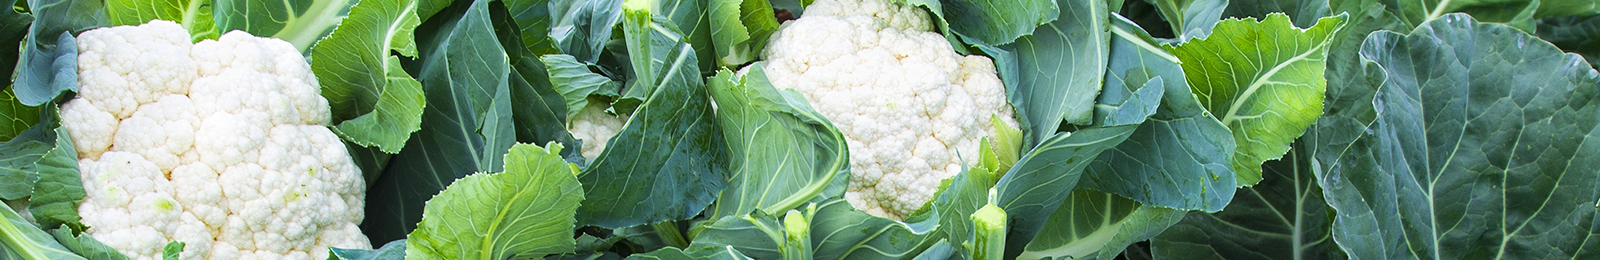 Cauliflower: Sow and Grow Guide